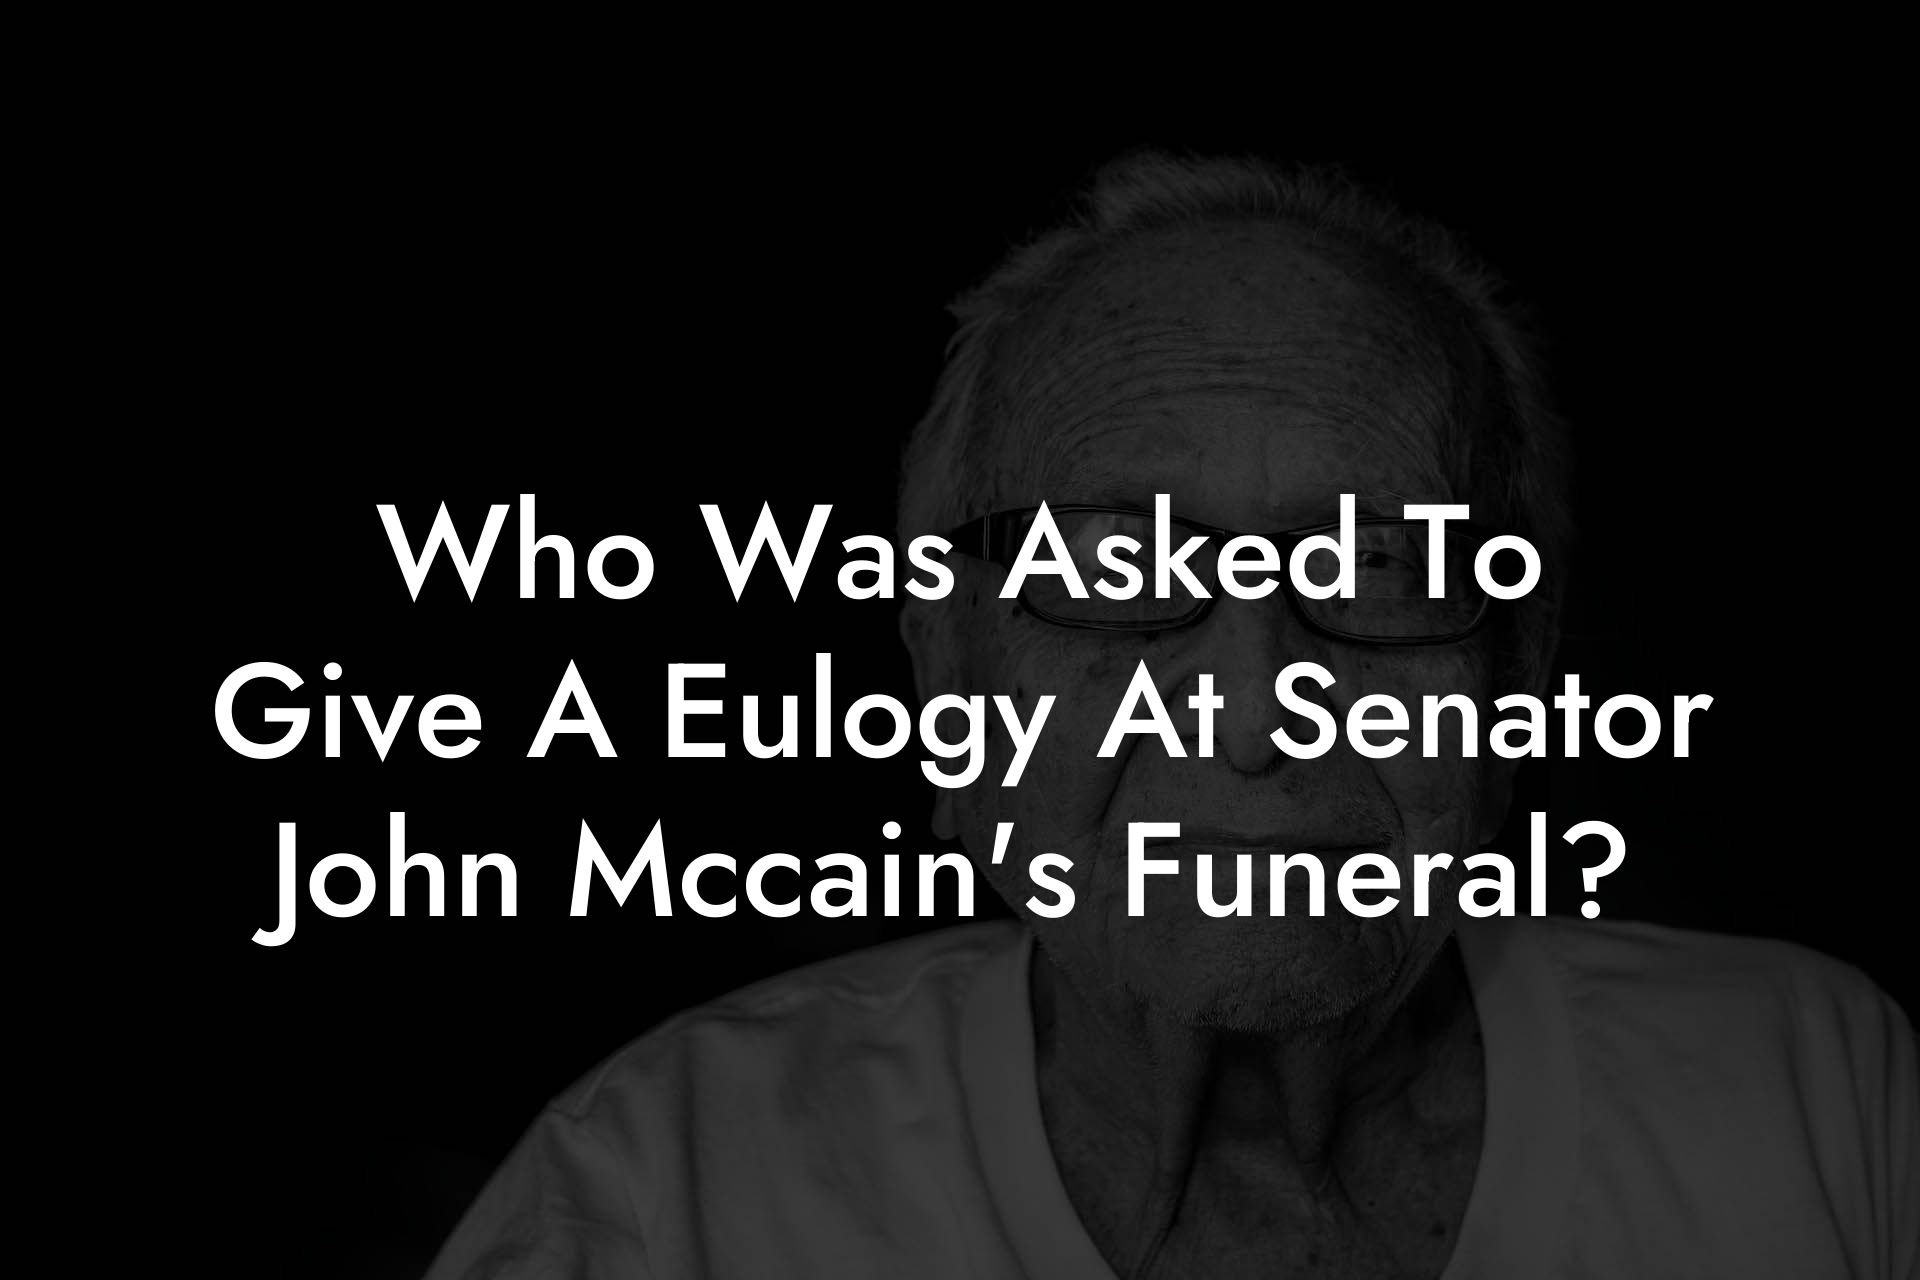 Who Was Asked To Give A Eulogy At Senator John Mccain's Funeral?